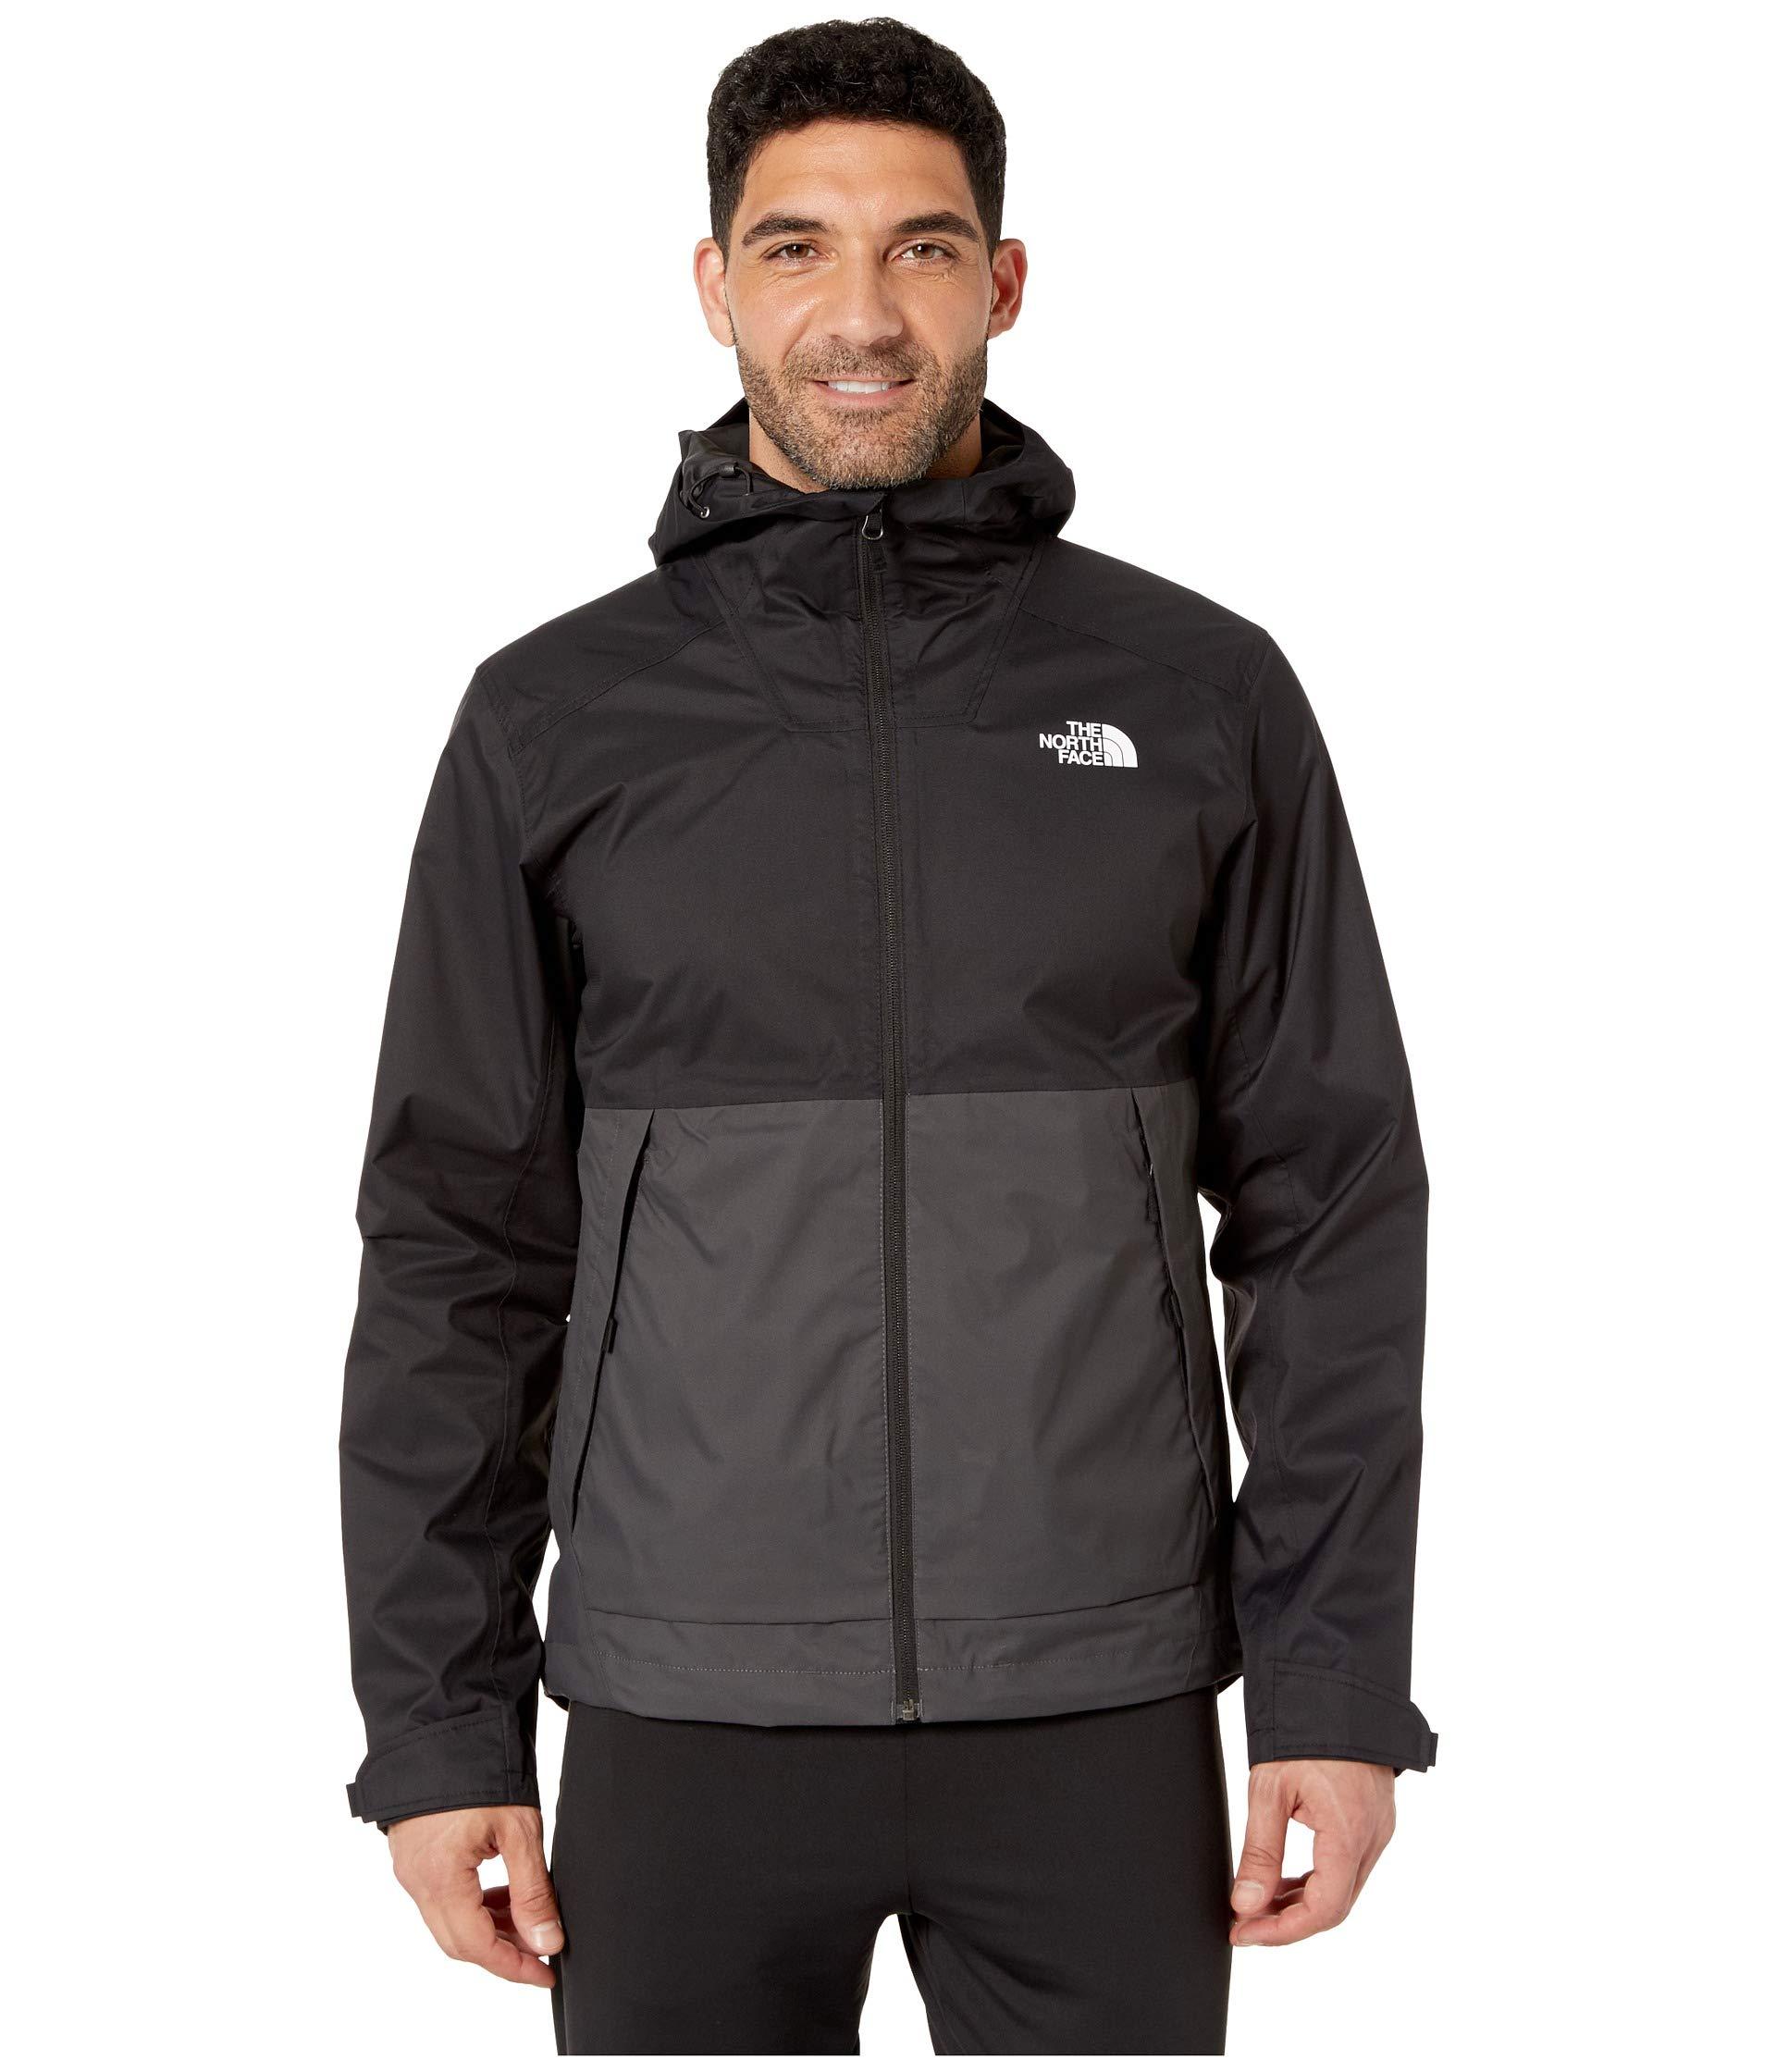 The North Face Millerton Jacket in Gray for Men - Lyst